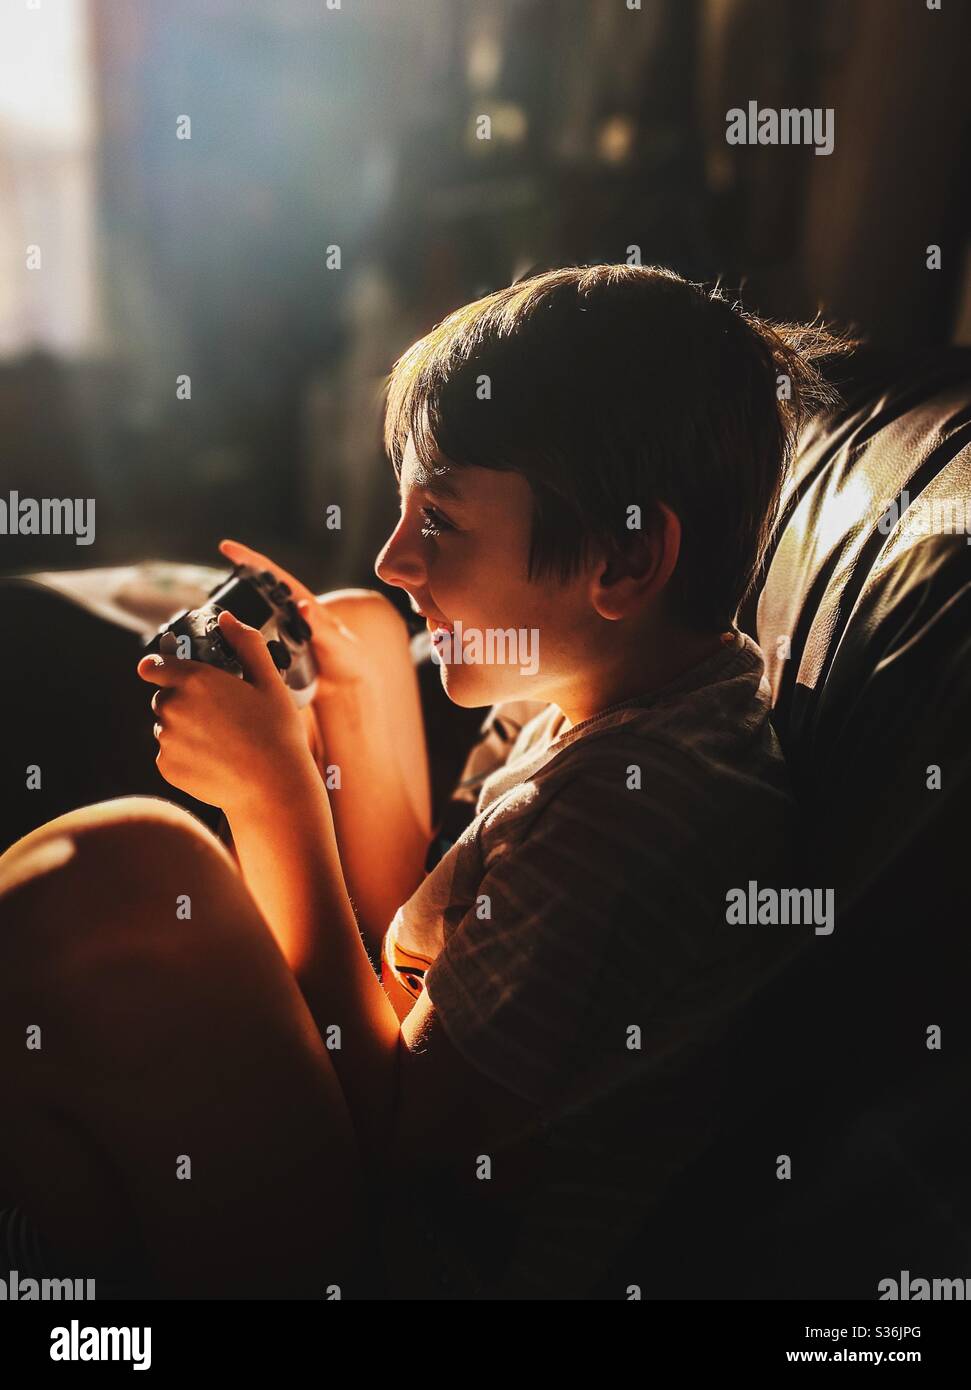 Boy playing games console Stock Photo